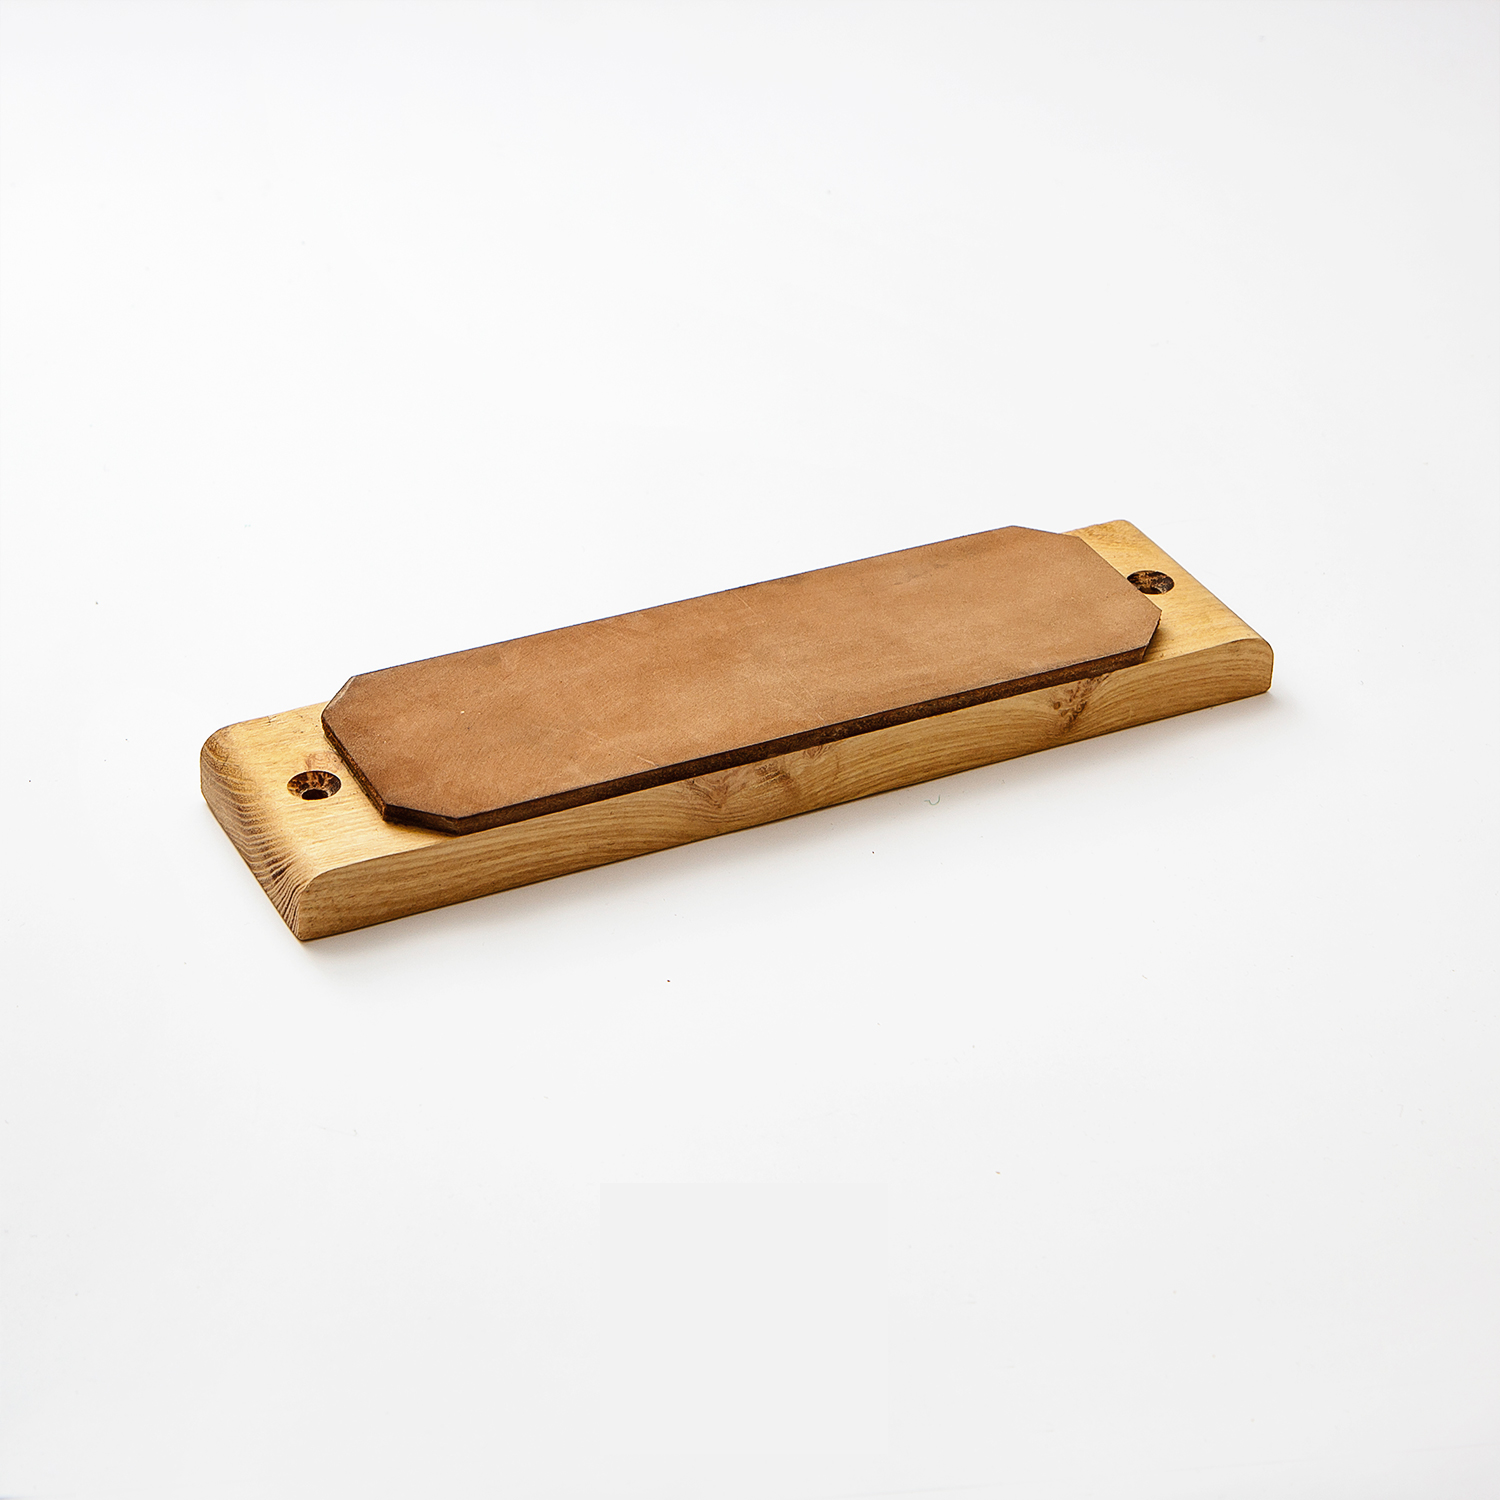 Premium Leather Strop Block for Honing Carving Tools and Knives